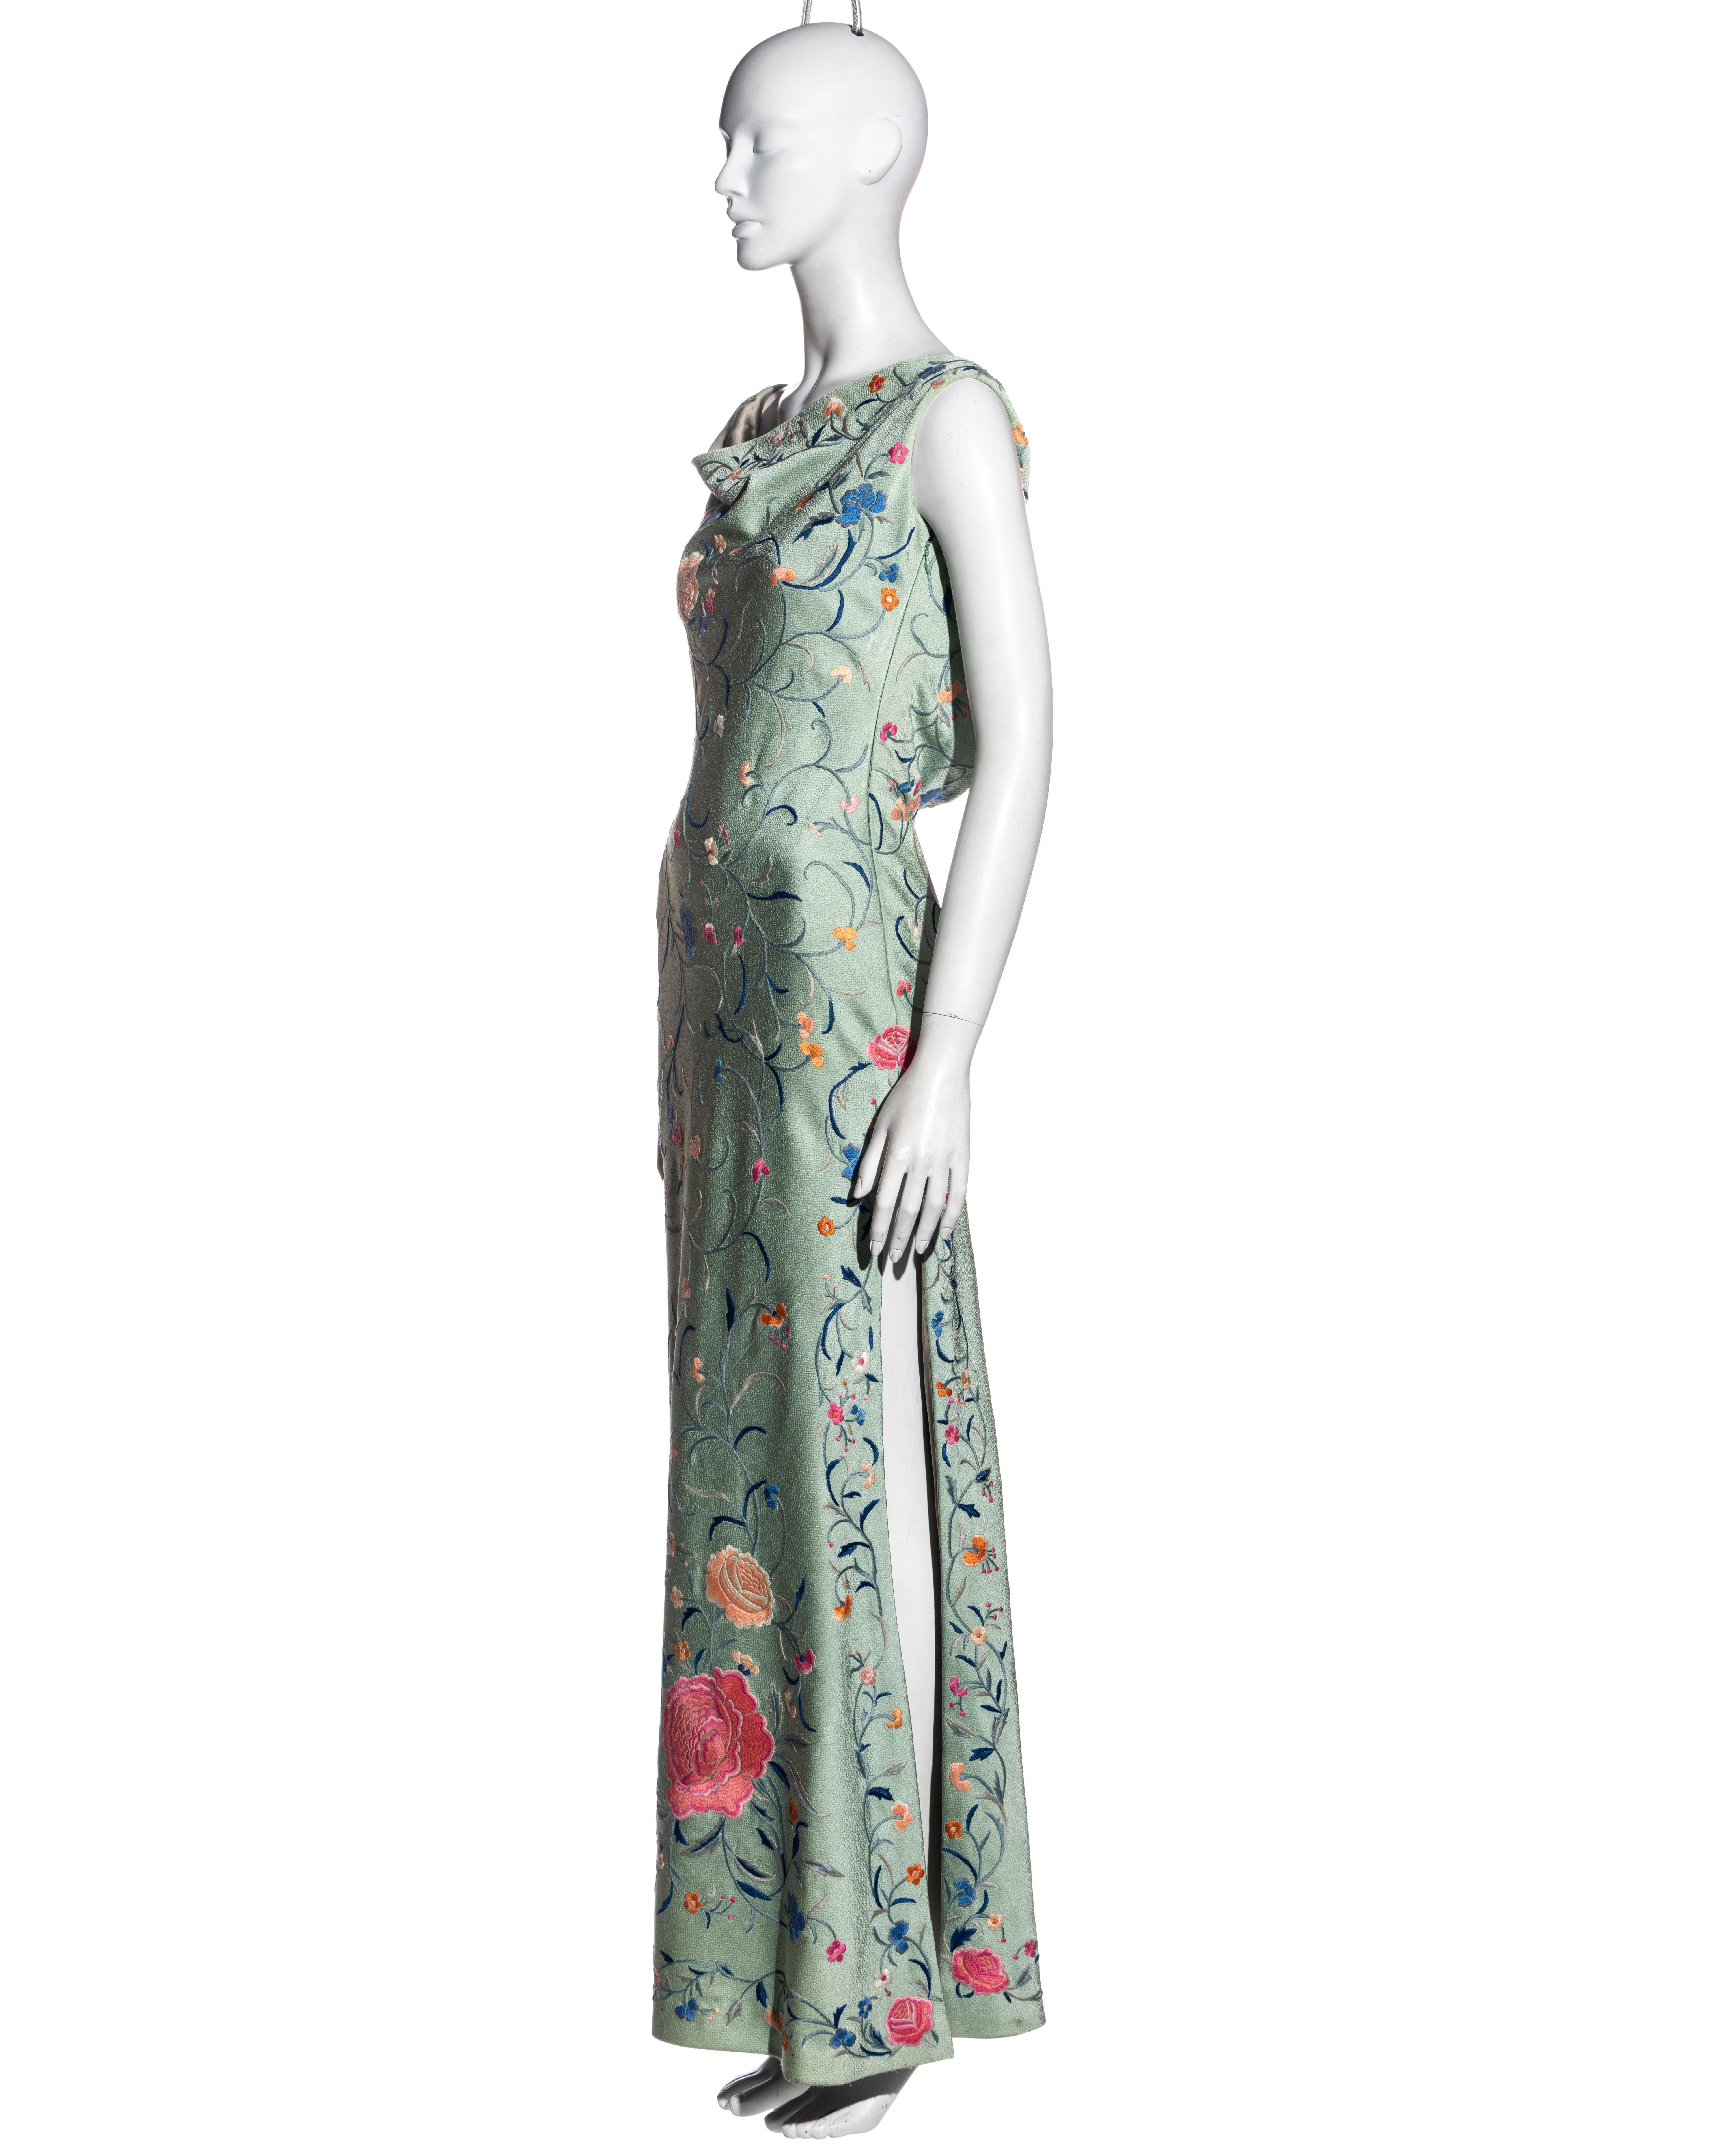 Women's Christian Dior by John Galliano floral embroidered silk evening dress, fw 1997 For Sale